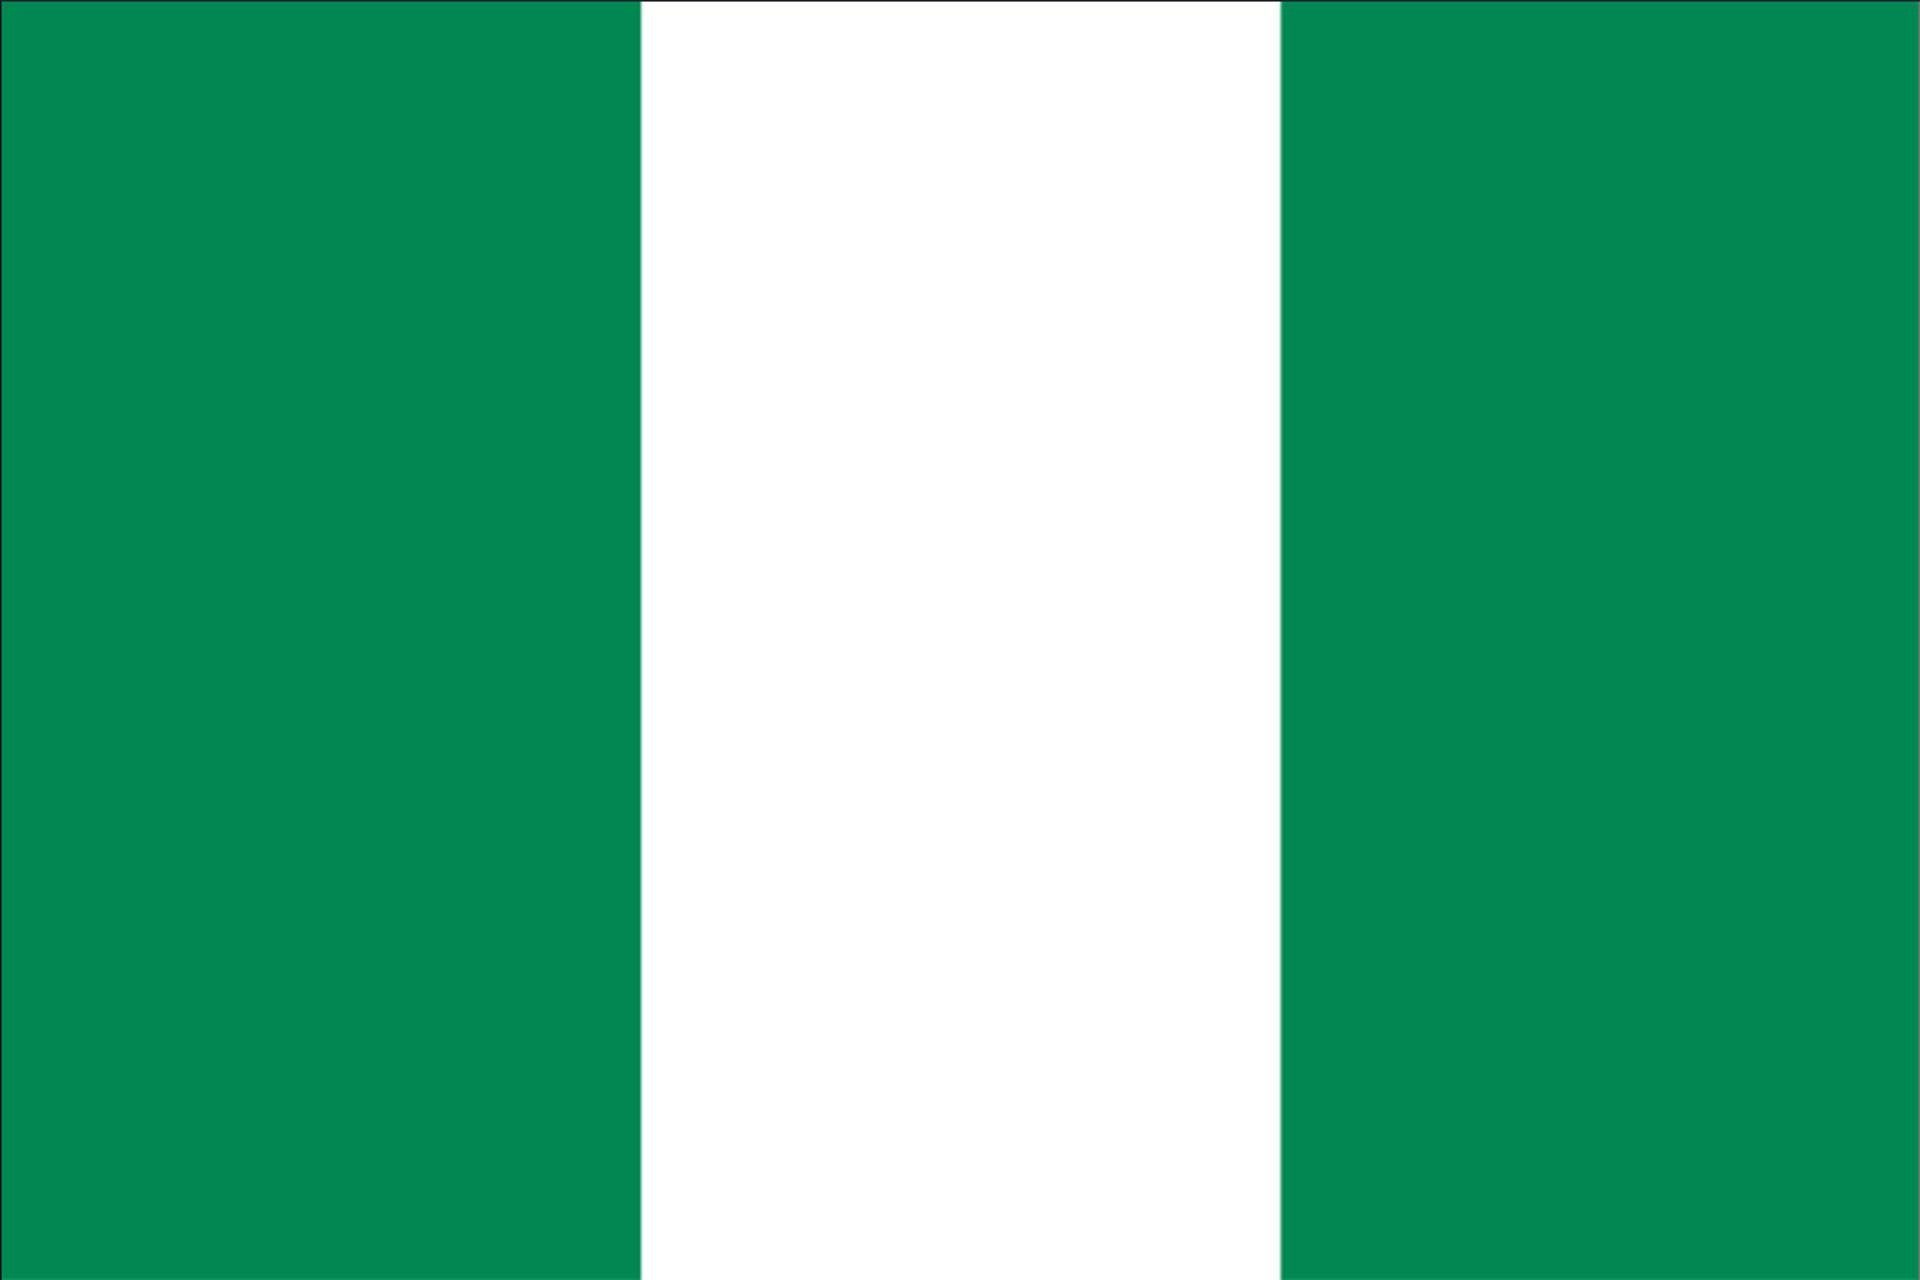 flaggenmeer Flagge Nigeria Querformat g/m² 110 Flagge